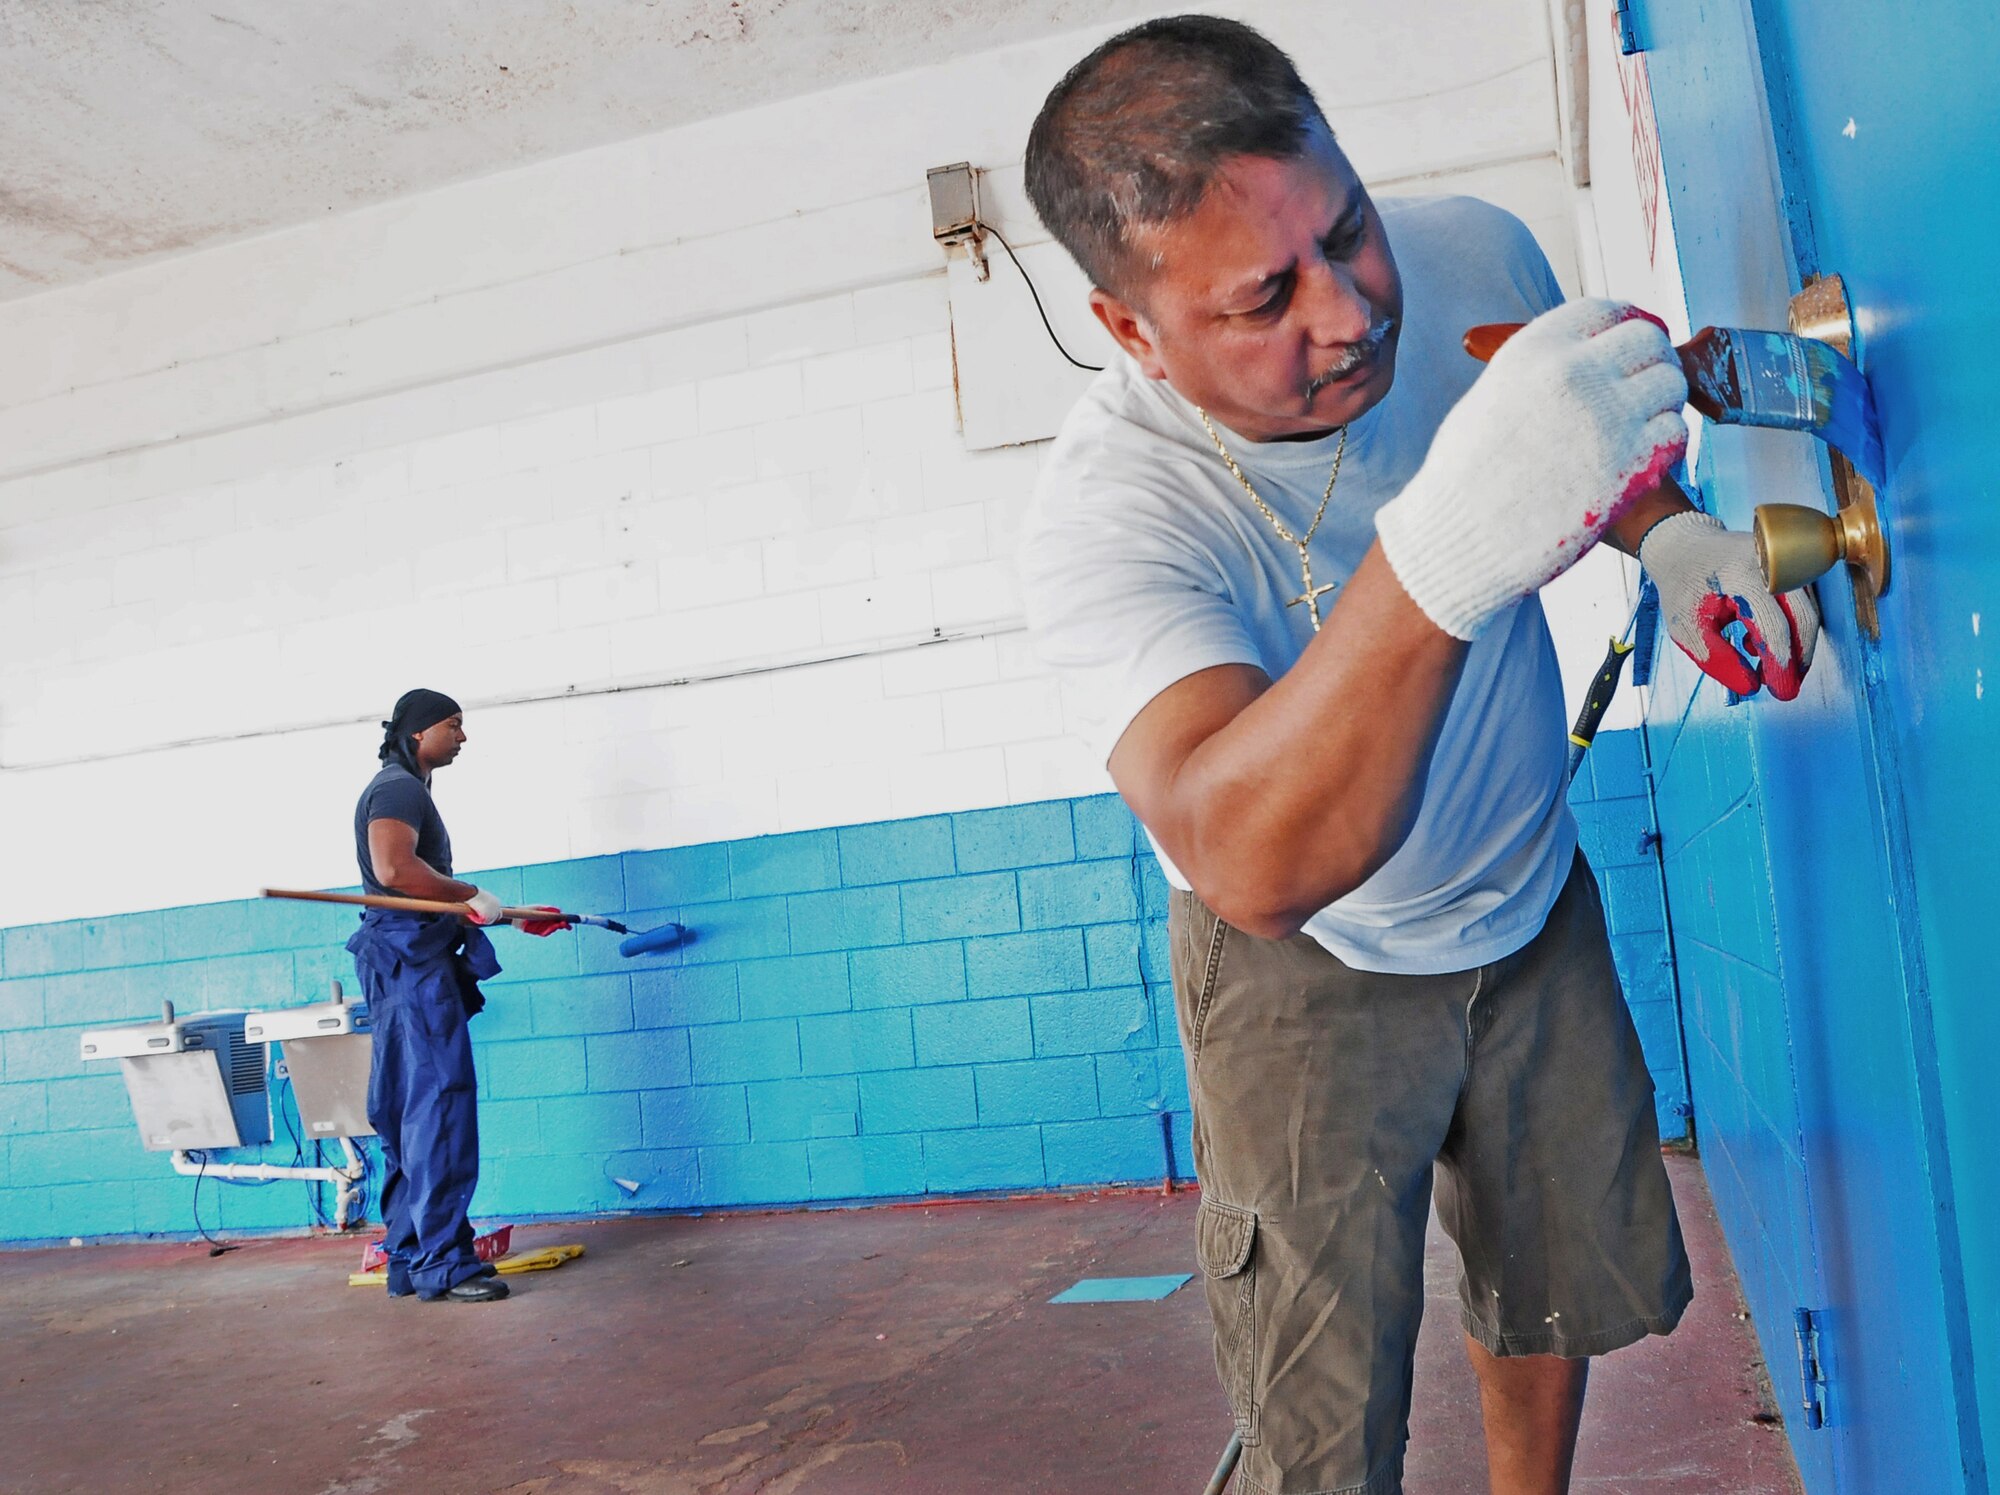 YIGO, Guam — Staff. Sgt. Sidney Okagu (left), 36th Mobility Response Squadron mobile command and control (C-2) controller, and Kent Espinosa, Francisco B. Leon Guerrero middle school aid, repaints the walls of the school during a campus clean up here, Aug. 2. The 36th Wing Airmen helped school staff clean and paint the school in order to get the campus ready for the incoming school year. (U.S. Air Force photo by Airman 1st Class Marianique Santos/Released)